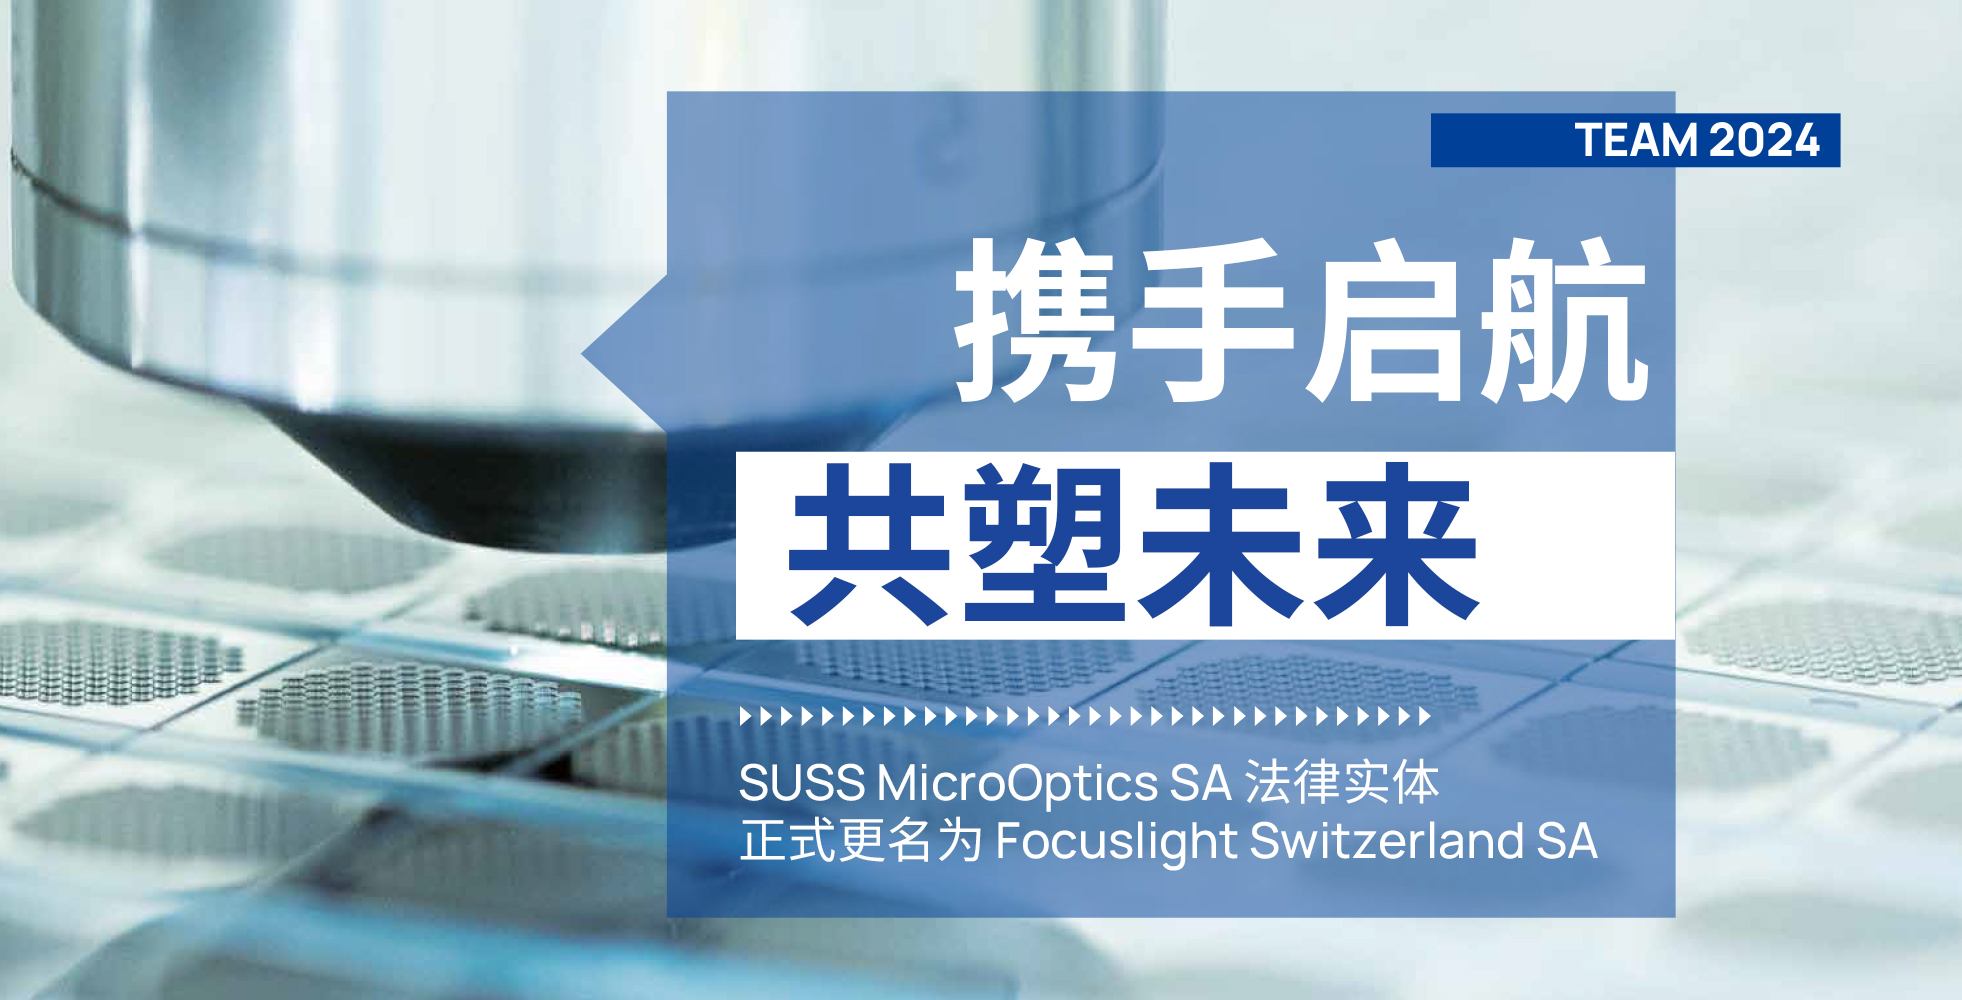 Focuslight Technologies Inc. Successfully Completes the Acquisition of SUSS MicroOptics SA, Further Strengthening Its Position as a Global Leader in Micro-Optics Solutions